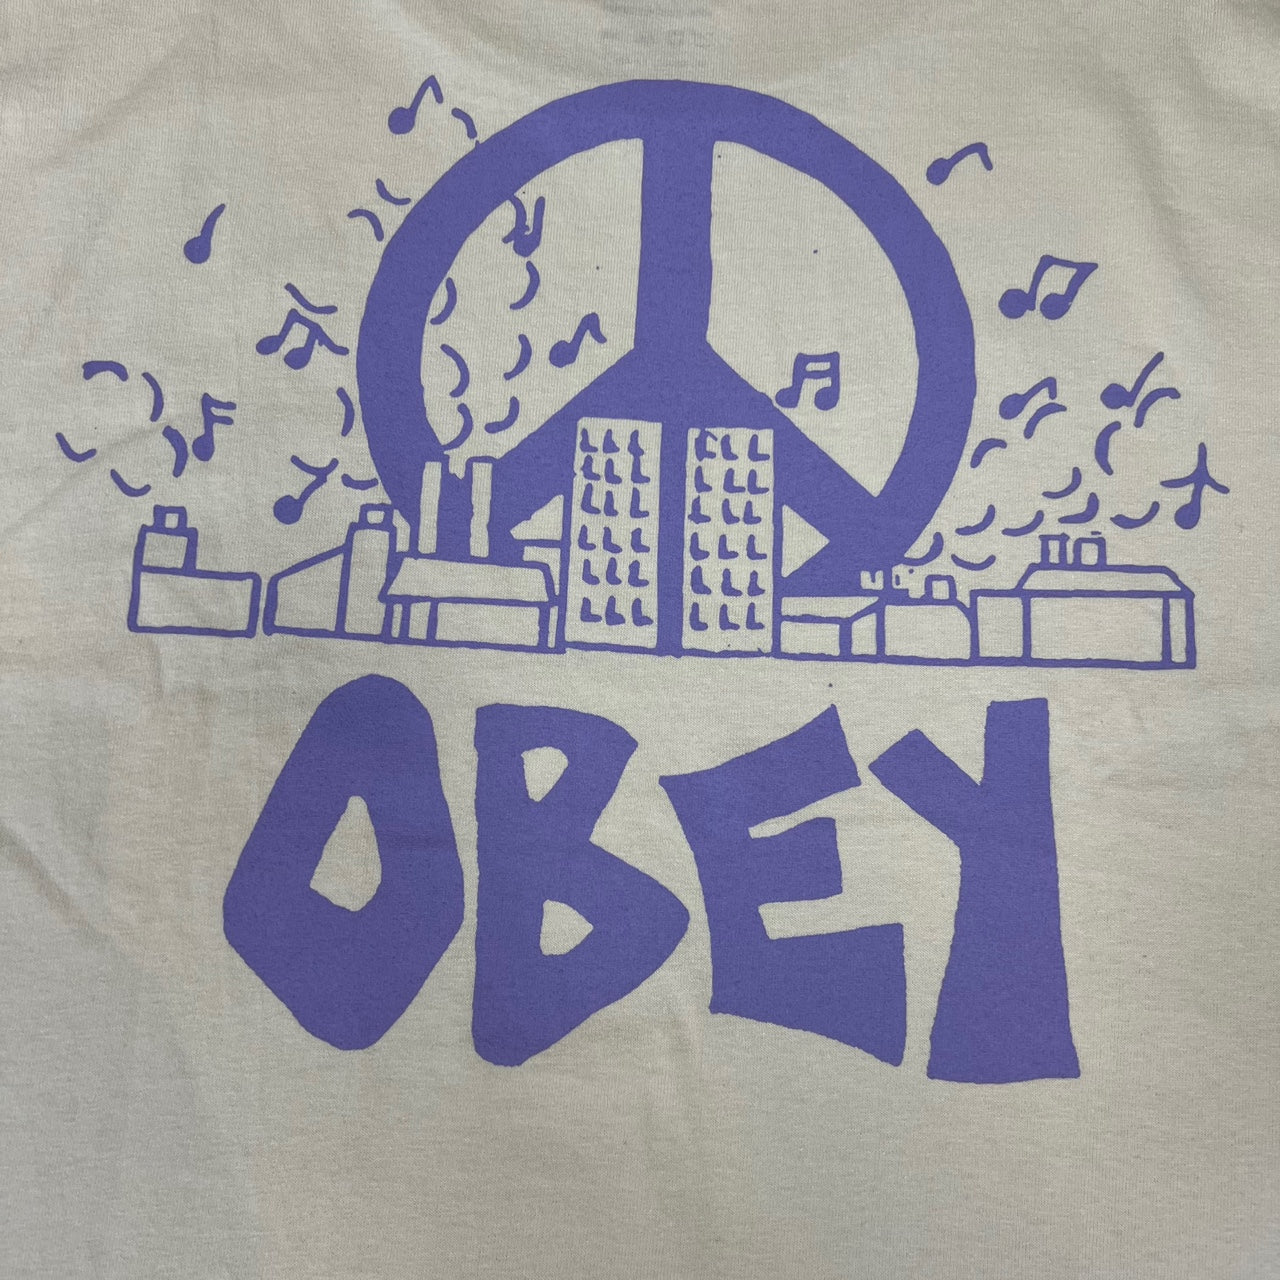 OBEY City Block Graphic T-Shirt